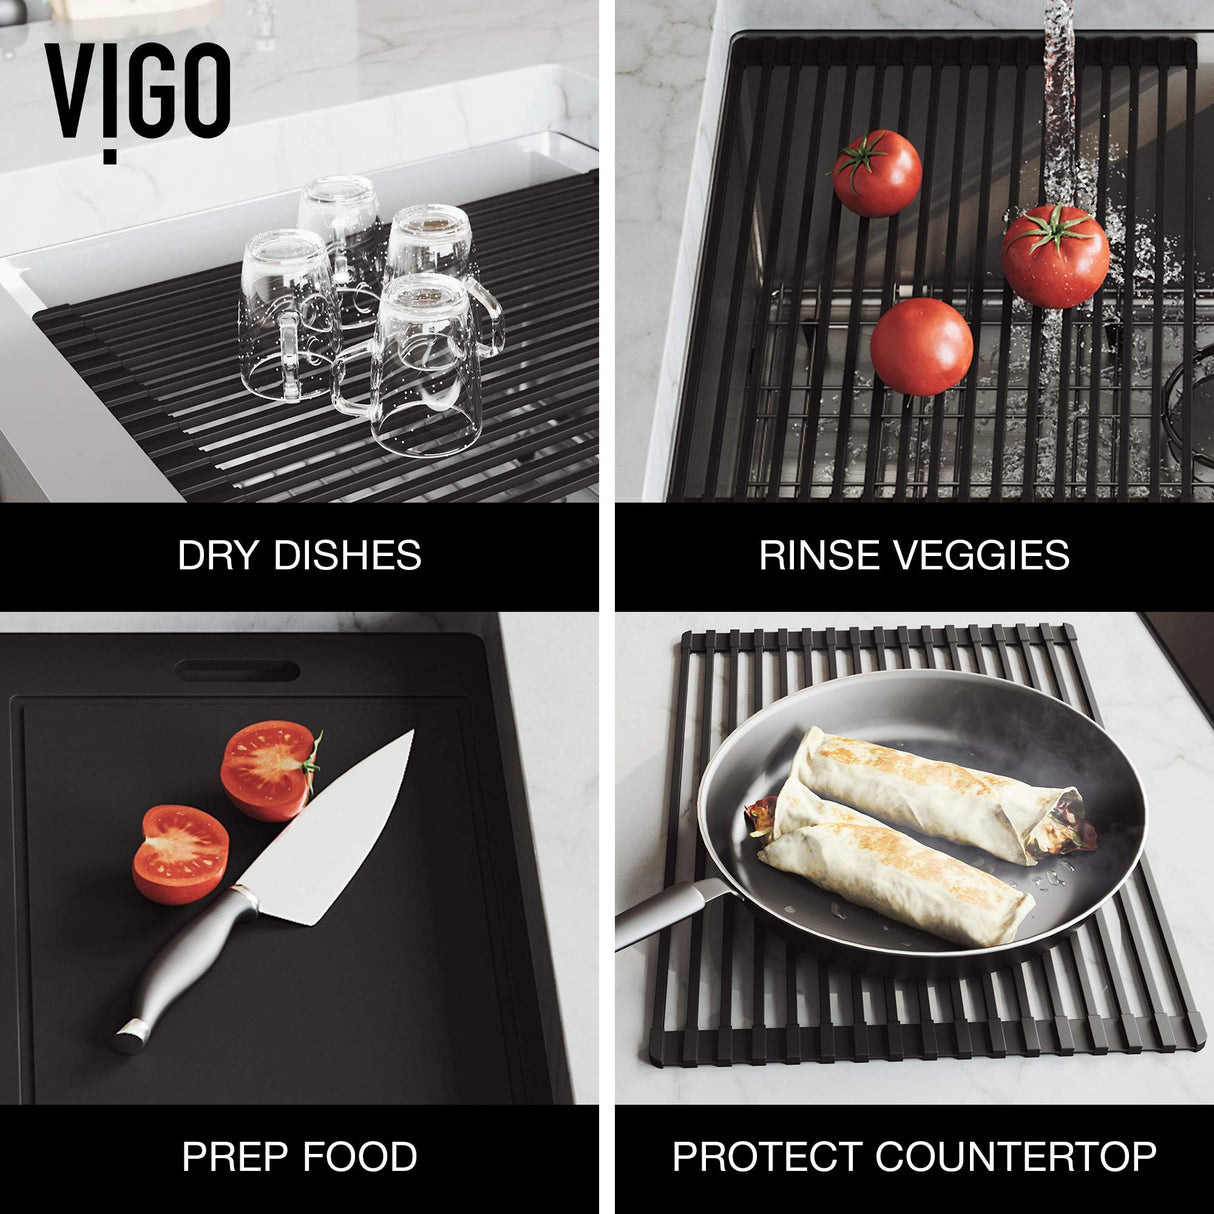 VIGO VGS3320BLSA 20.5" L -33.0" W -10.0" H Handmade Stainless Steel Double-Bowl Slotted Apron Front Farmhouse Kitchen Sink Workstation with Cutting Board, Drying Rack, 2 Bottom Grids and 2 Strainers